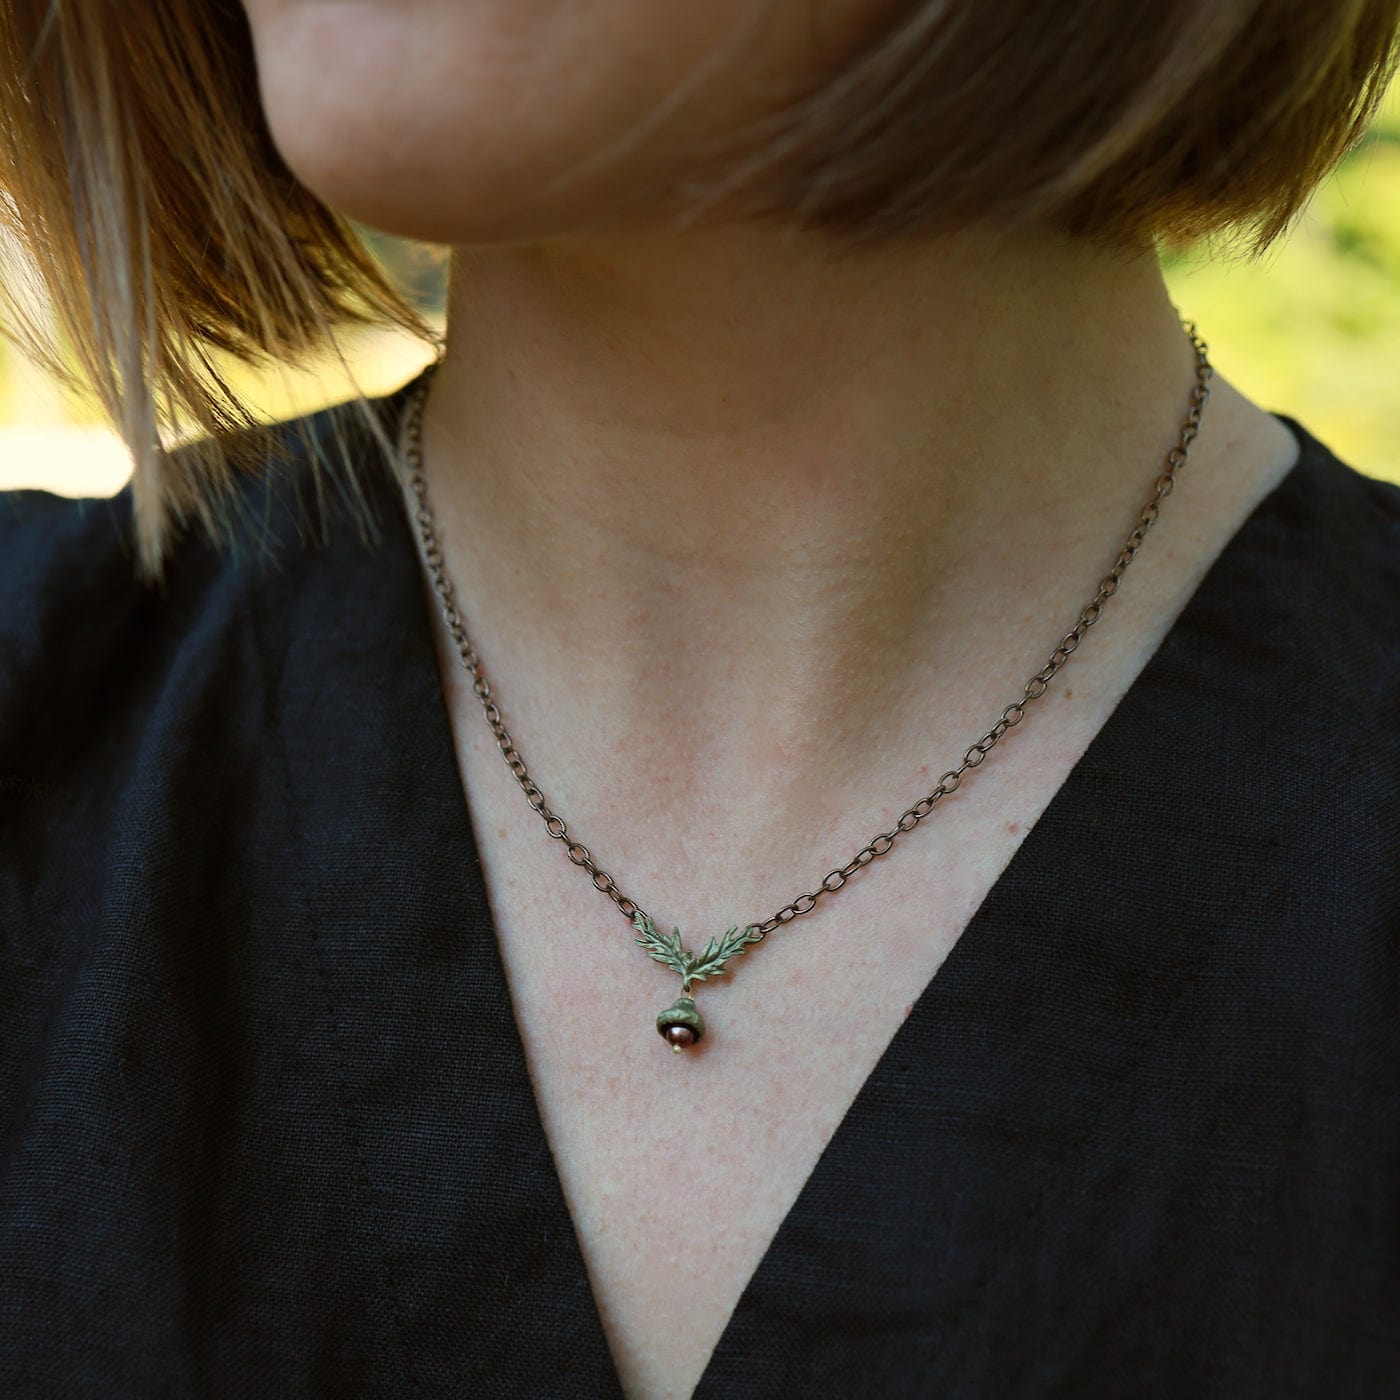 NKL Acorn Chain Necklace with Pearl